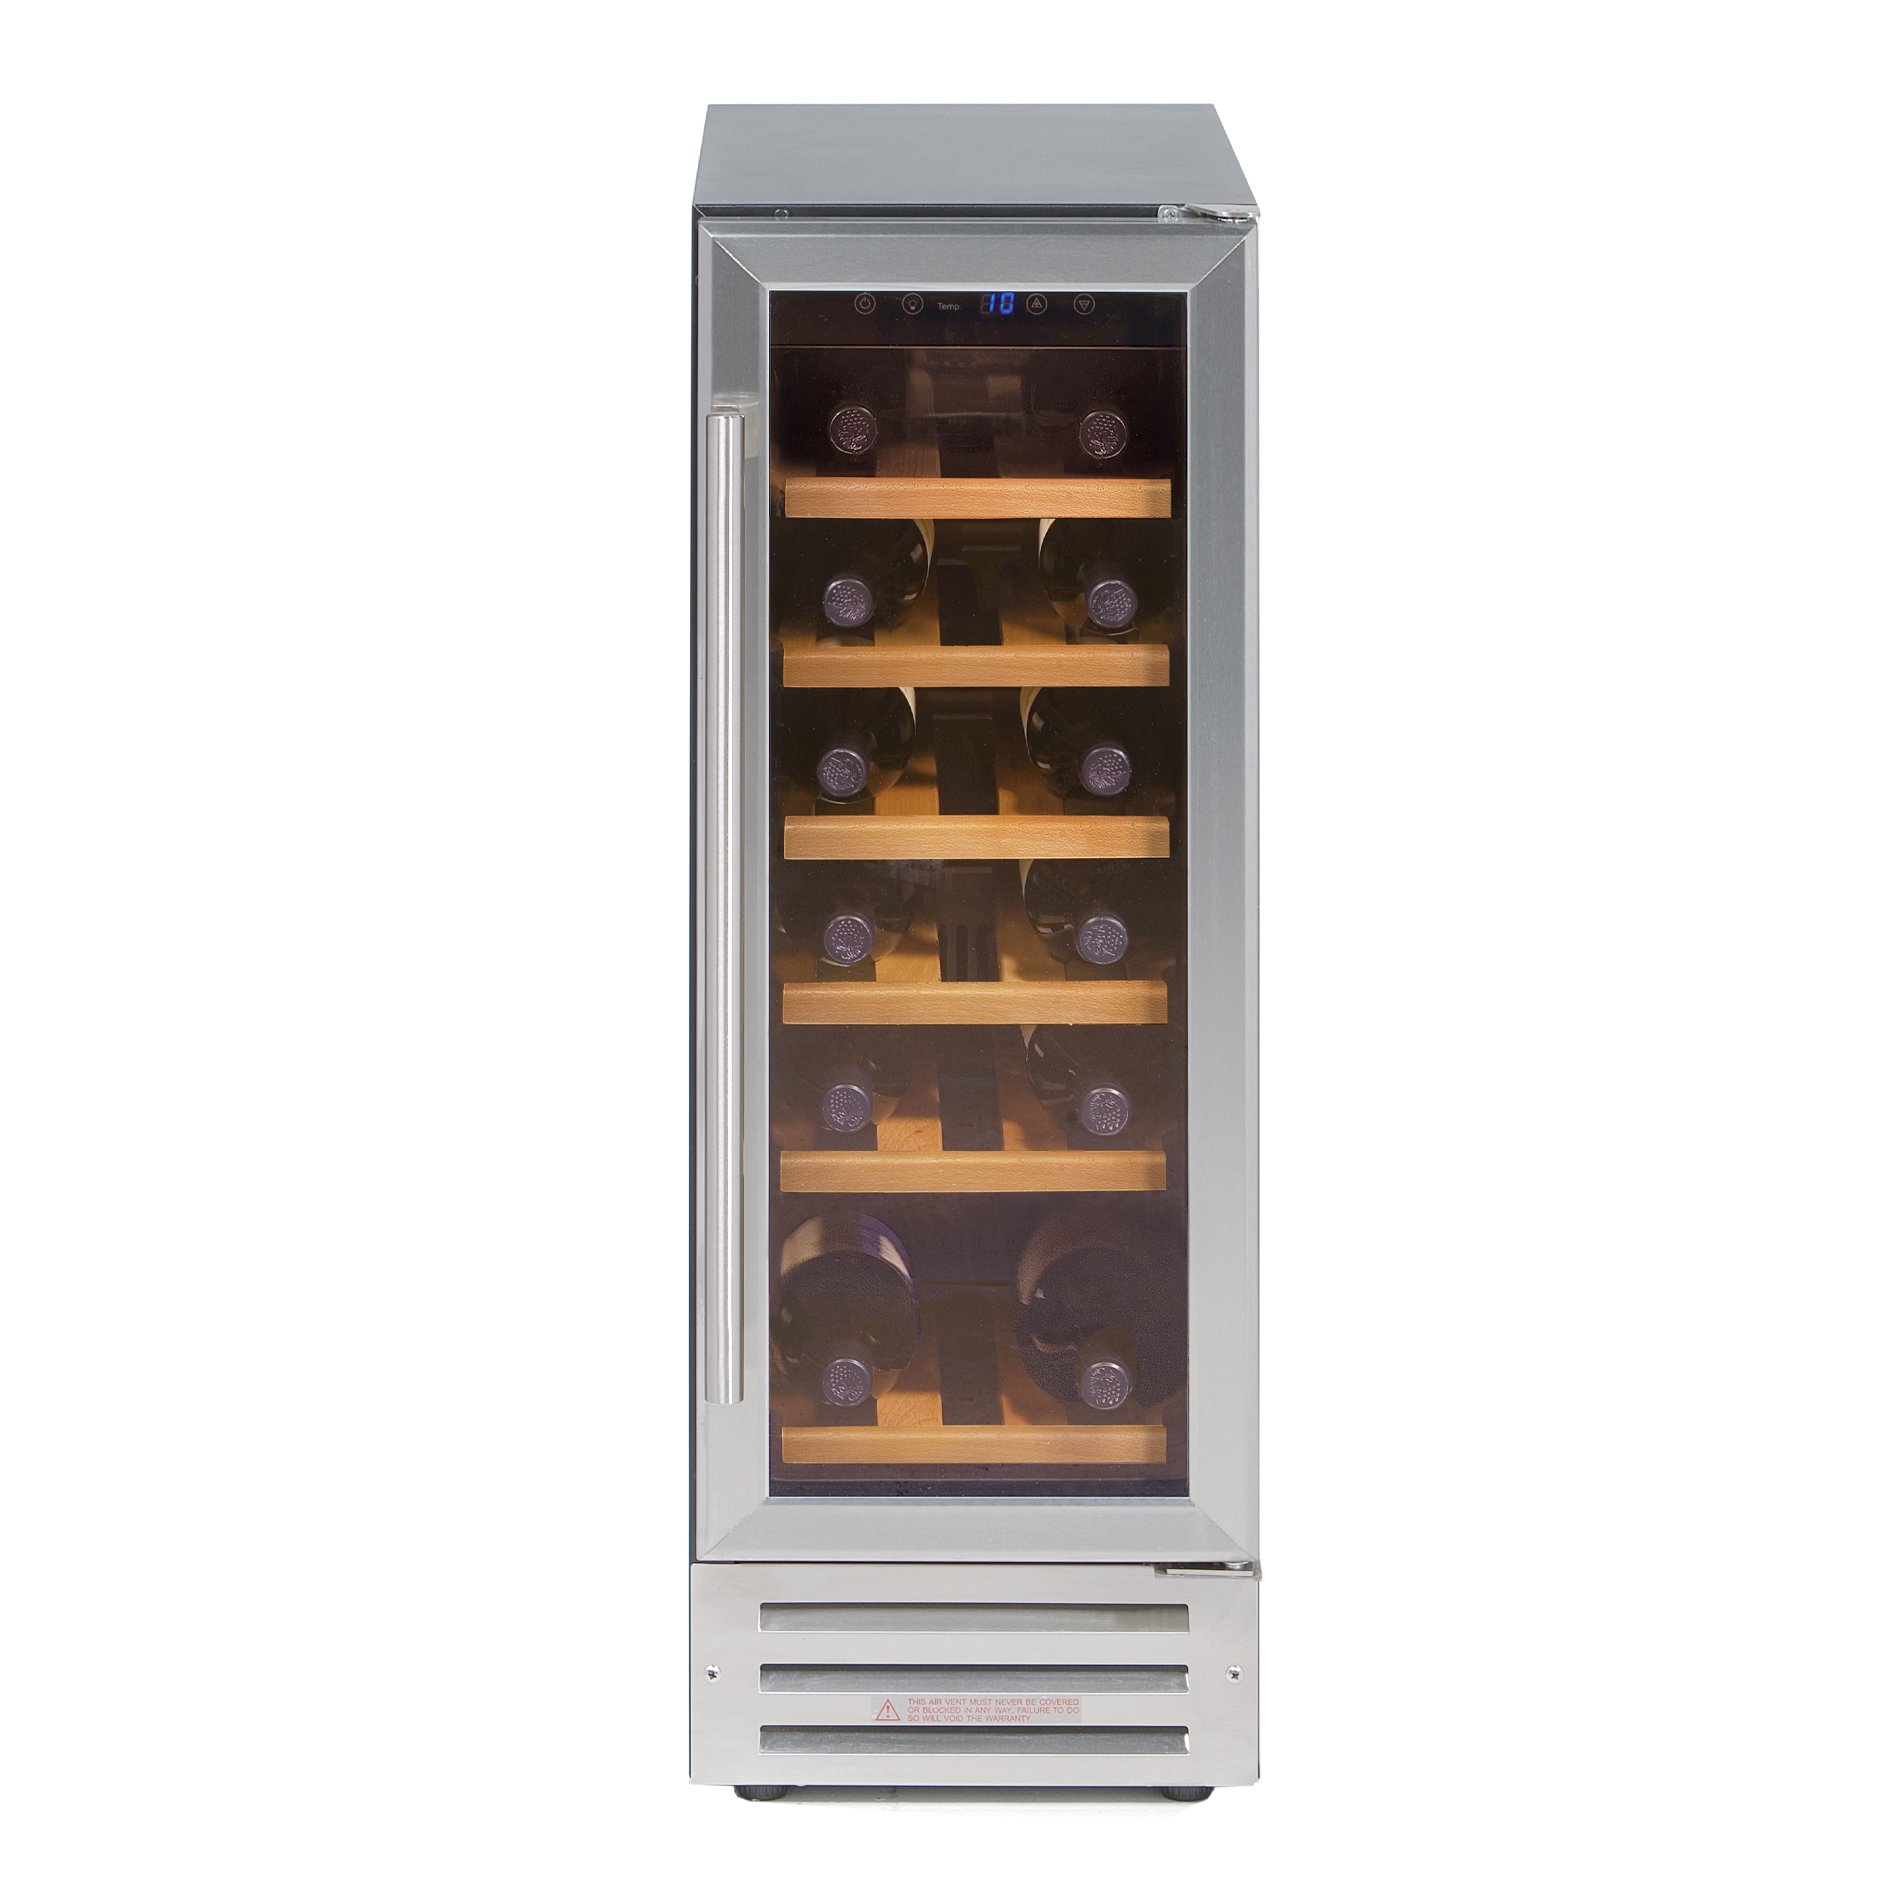 Integrated 30cm wine cooler has a 58 litre capacity which equates to approximately 18 bottles. F<span>eatures include CFC/HFC free, adjustable thermostat and digital temp display.